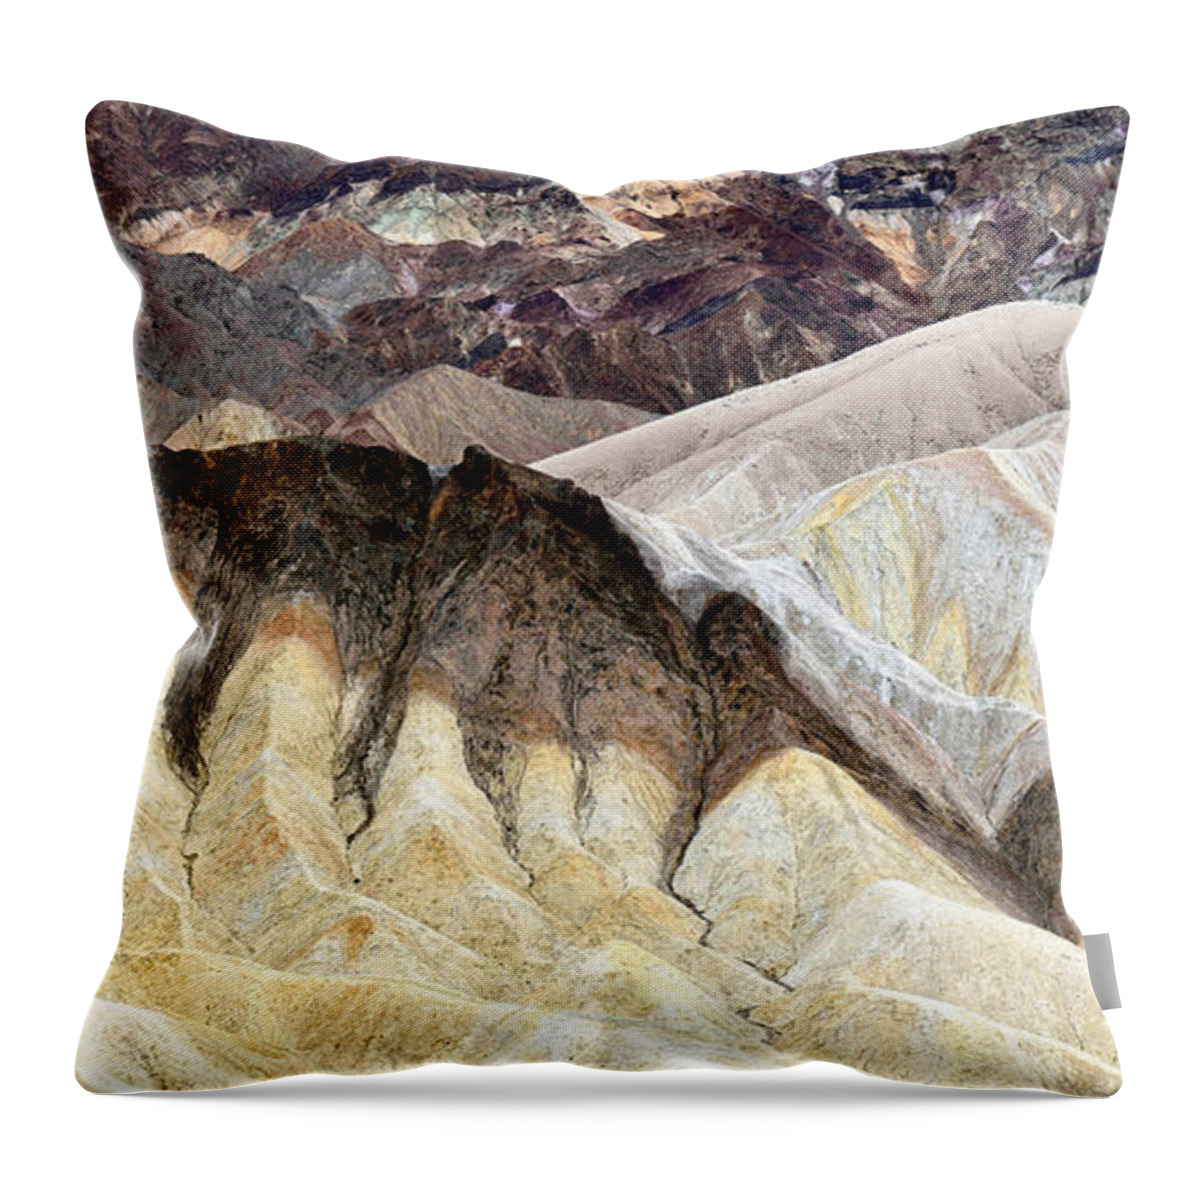 Landscape Throw Pillow featuring the photograph Geologic Abstract Art. by Paul Martin